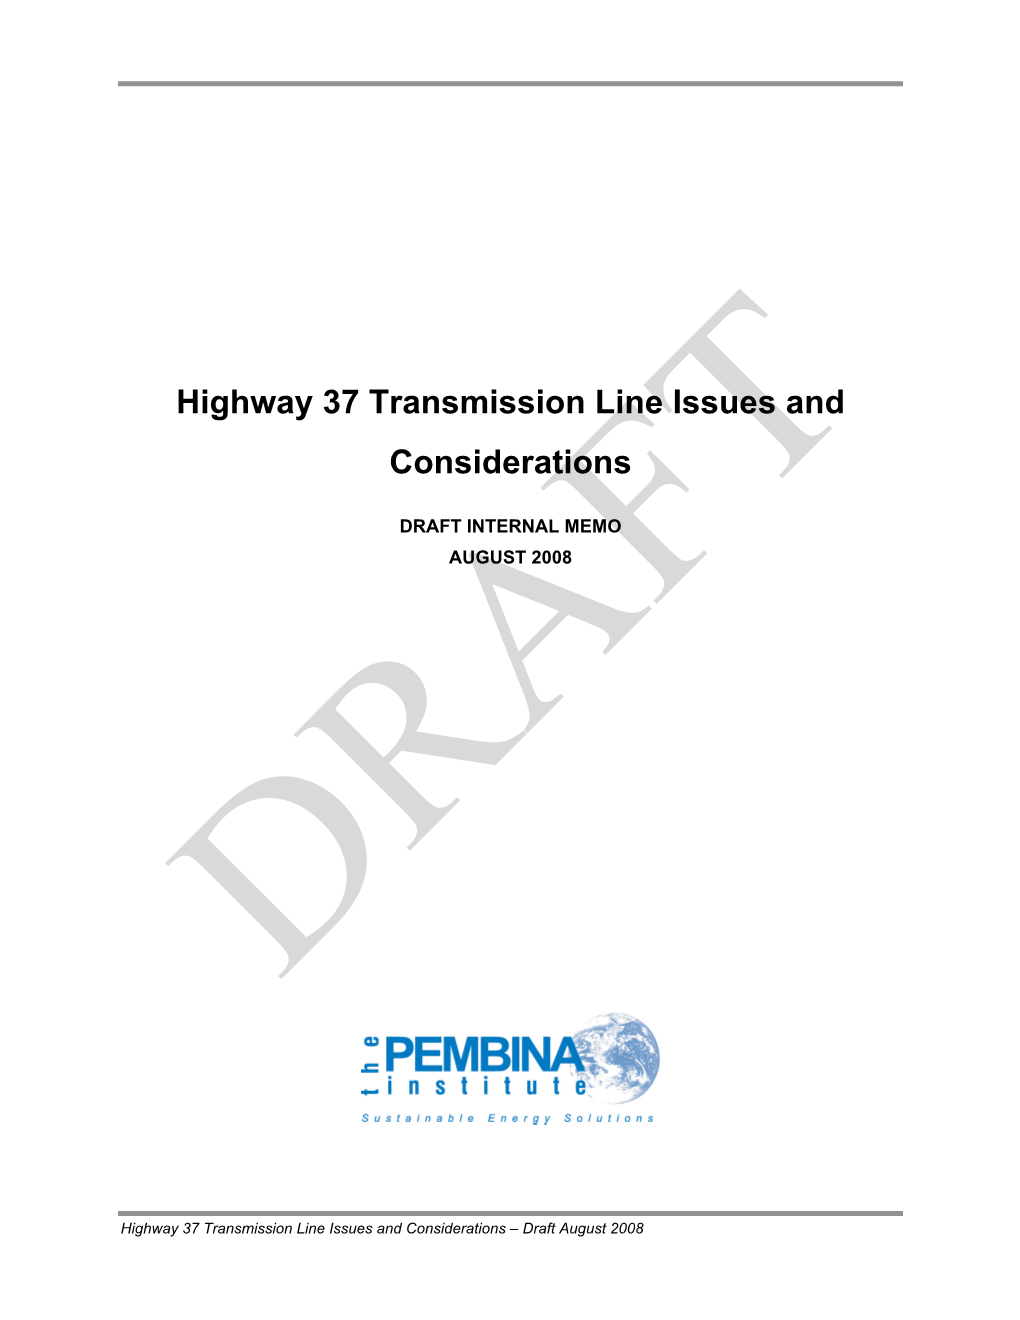 Highway 37 Transmission Line Research Memo Draft 2008